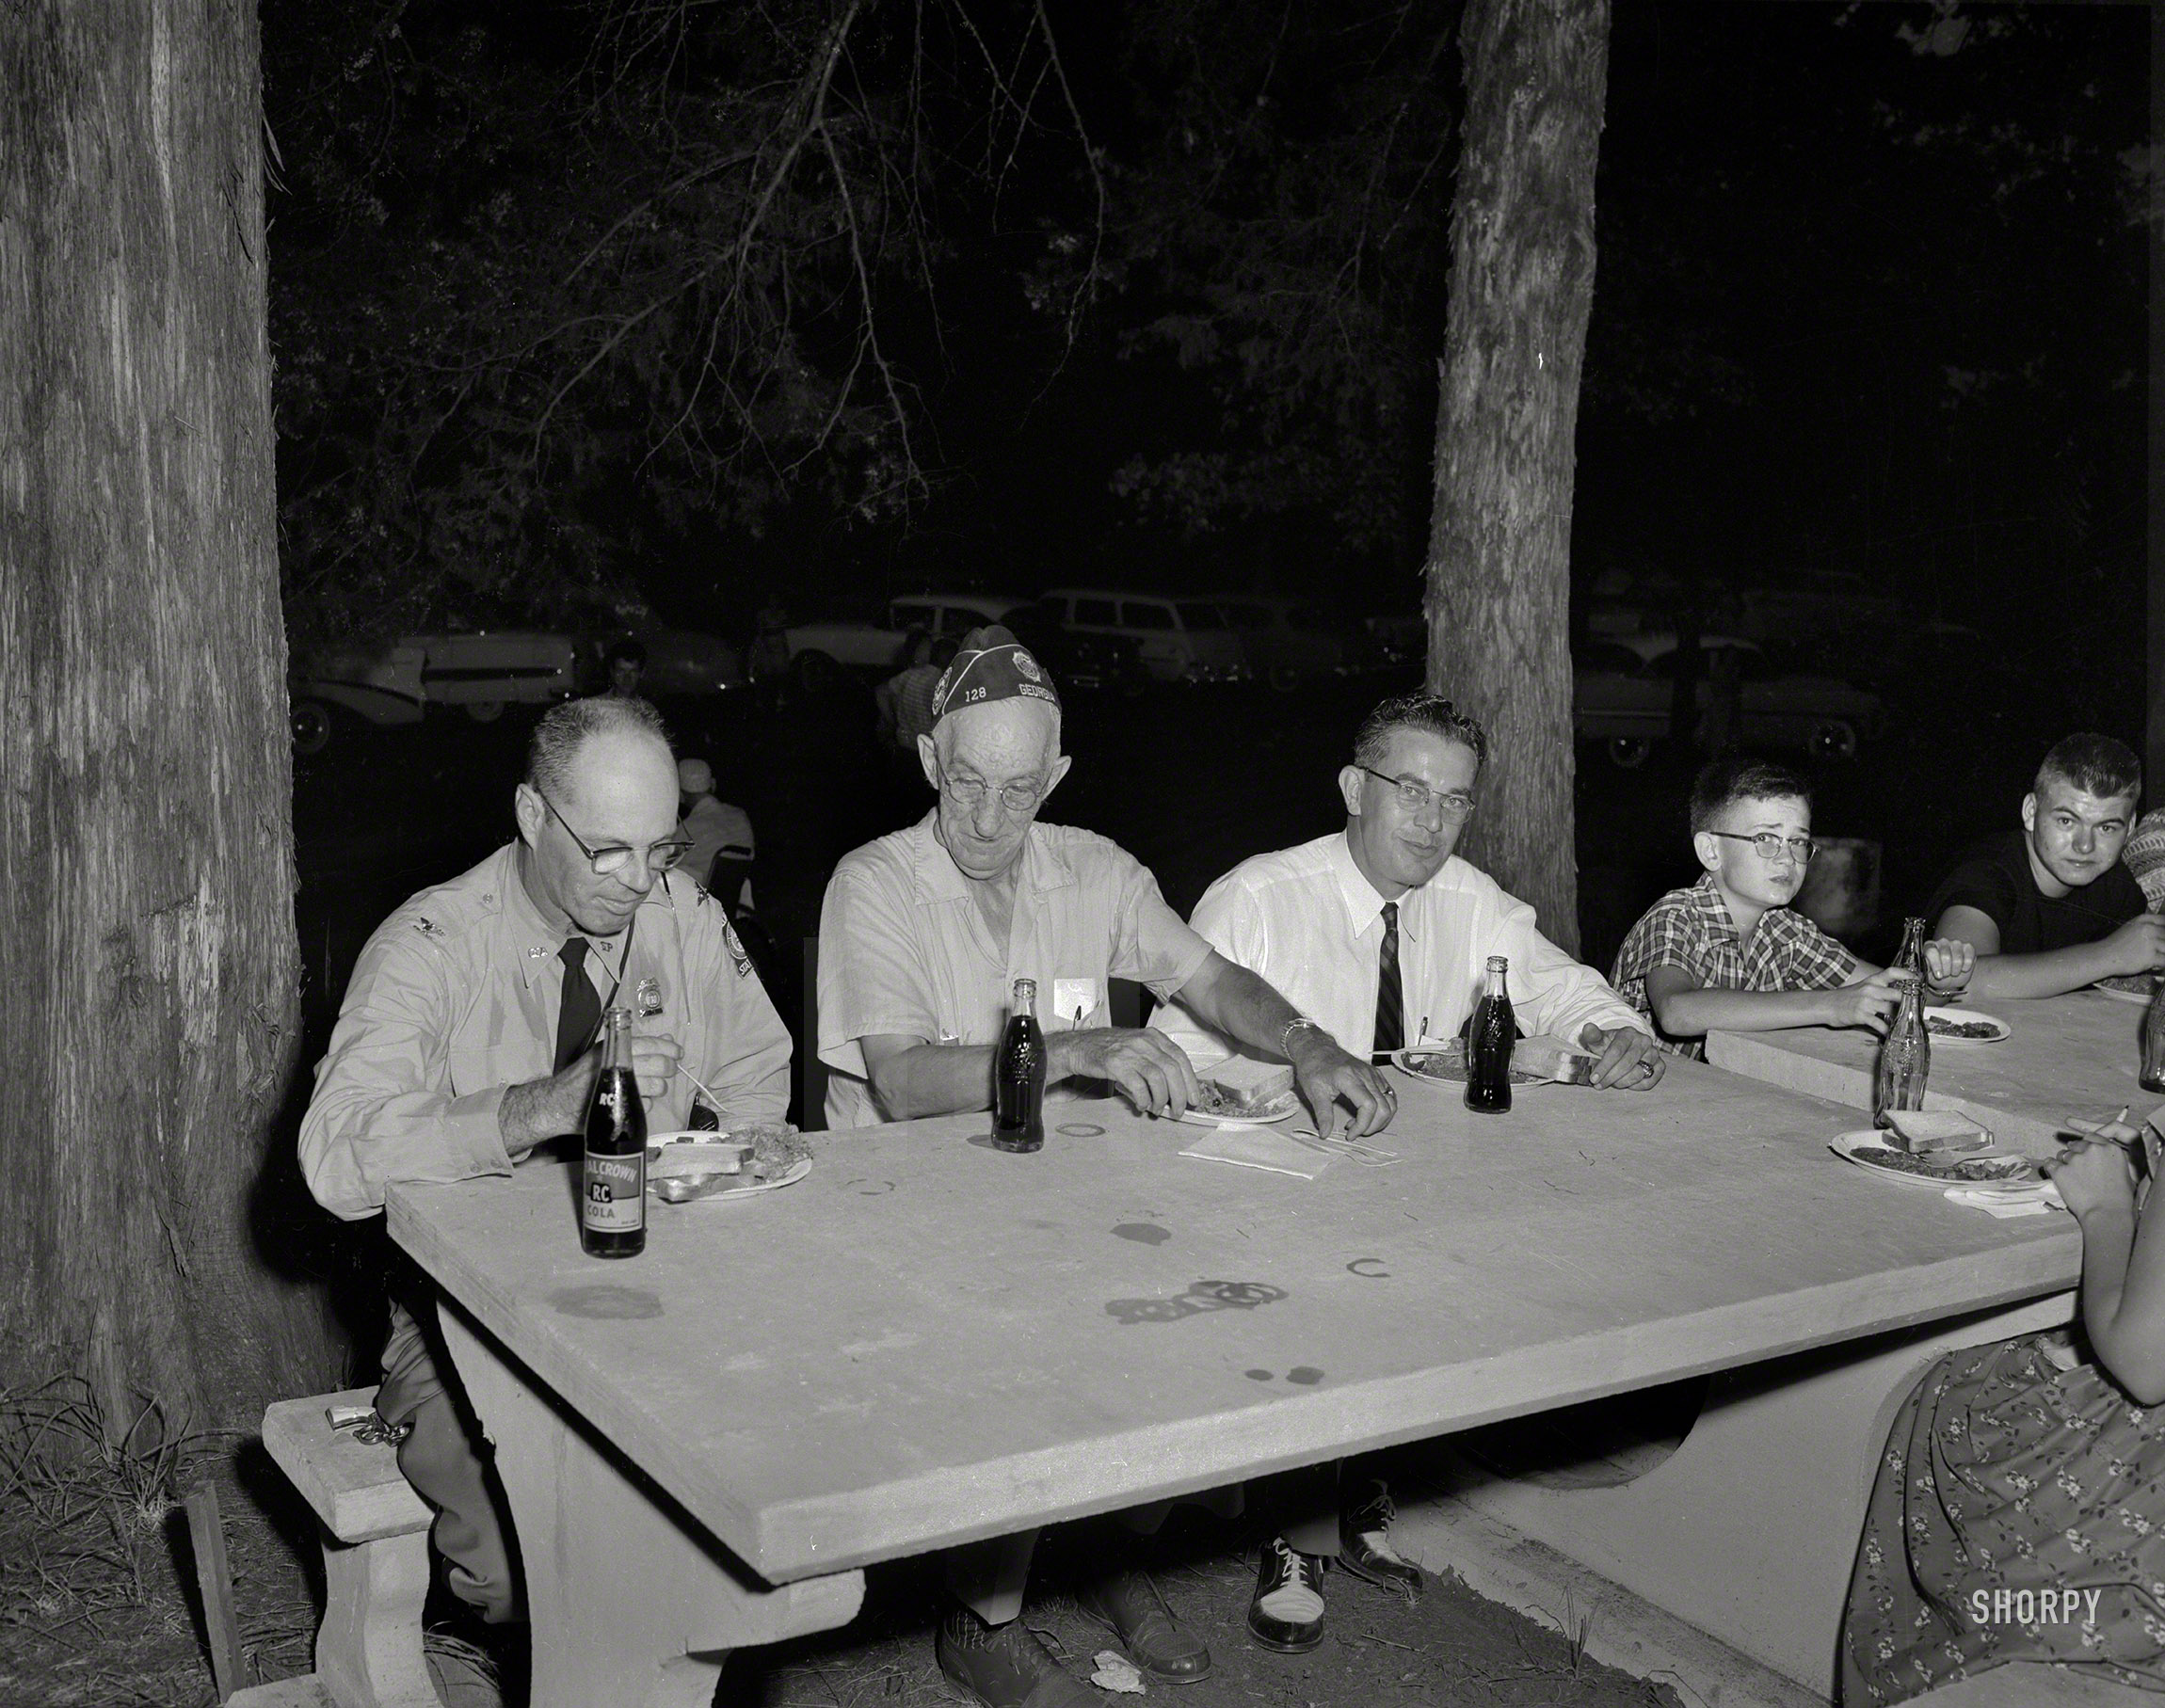 Columbus, Georgia, circa 1956. "Boys Club picnic." RC Cola outlier on the left, and he's armed. 4x5 acetate negative from the News Archive. View full size.